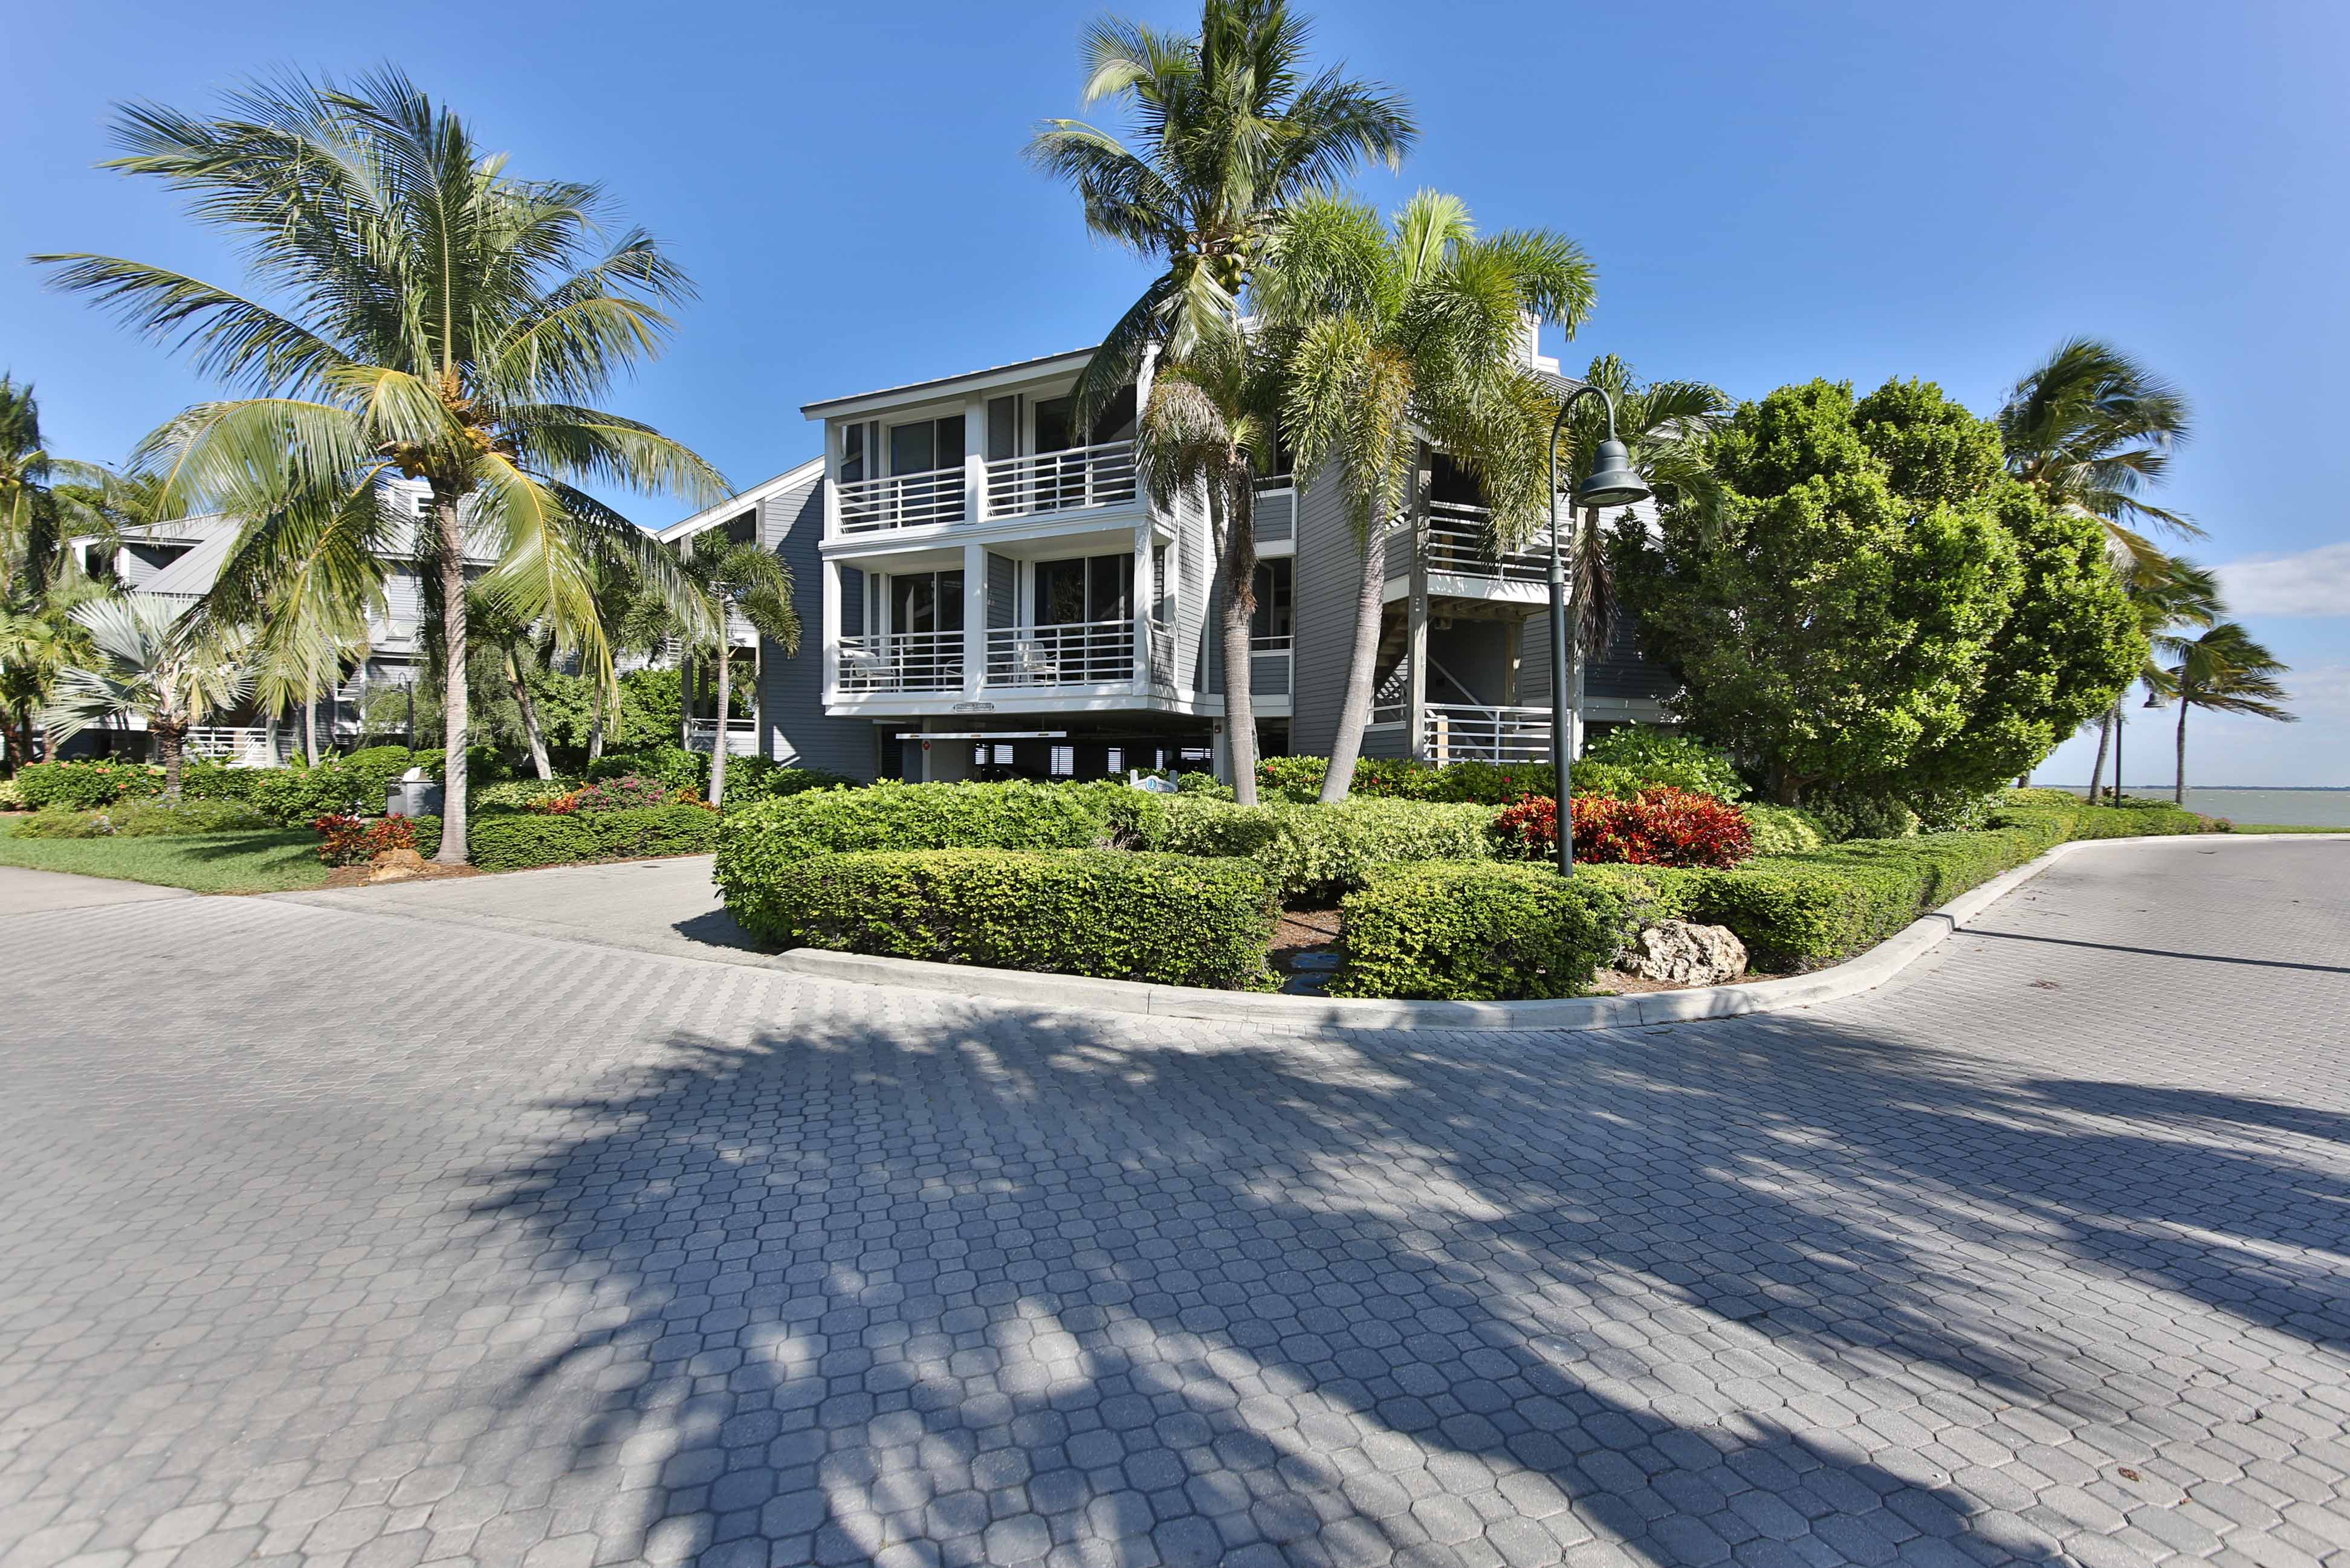 View of the Exterior of 1602 Lands End Village in Captiva Island, Florida